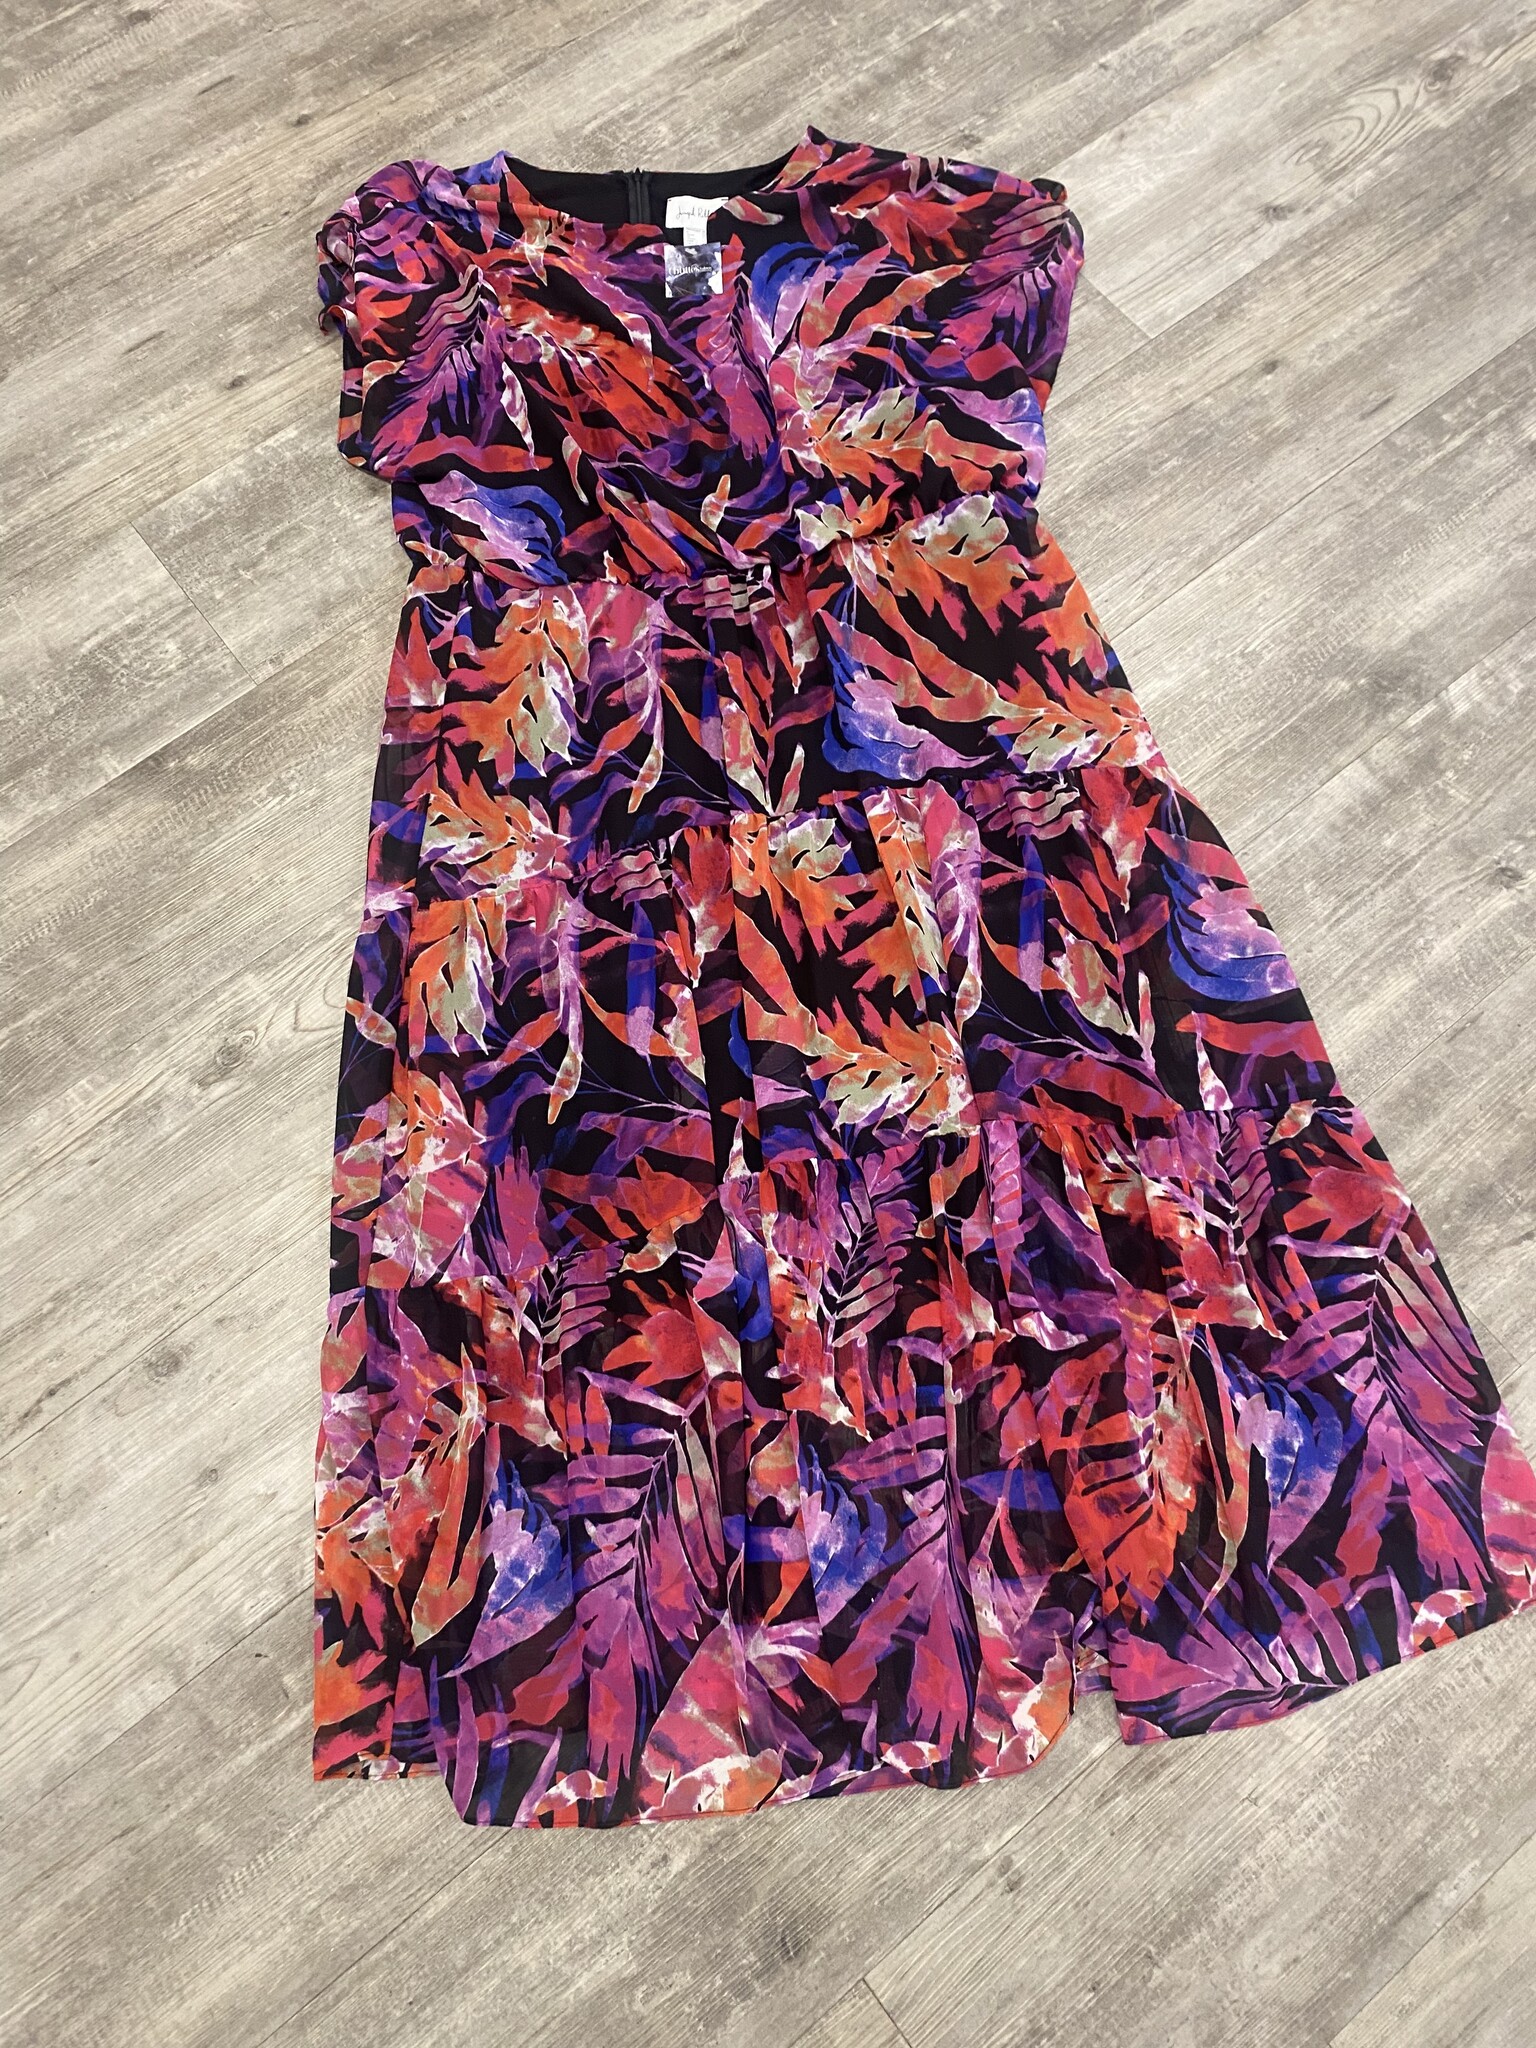 Colorful Tiered Dress - Size 22